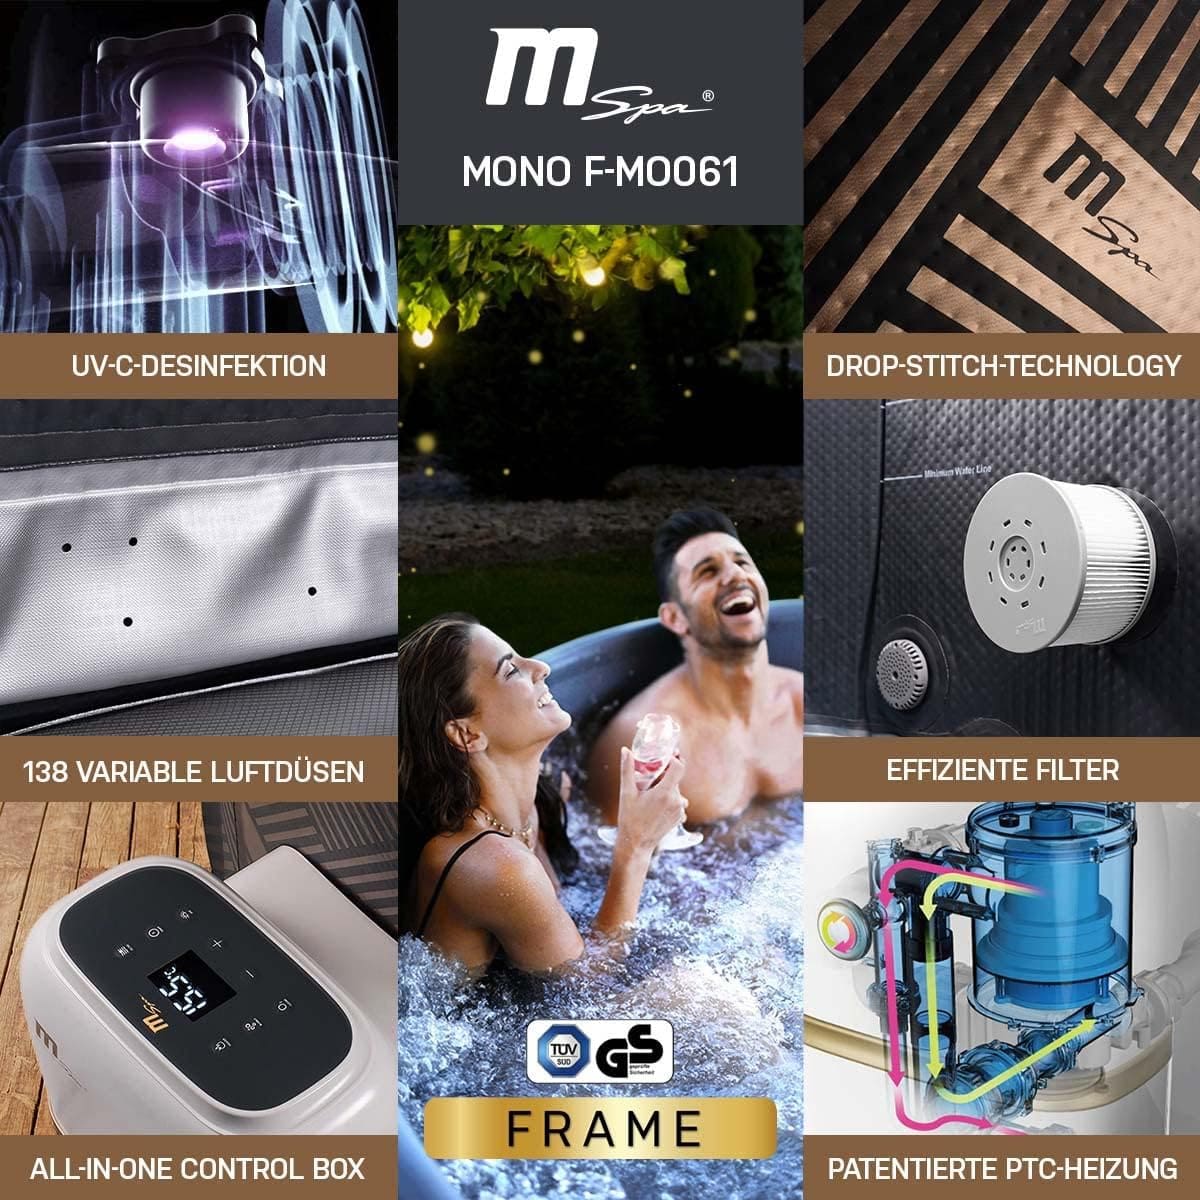 MSPA D-TE06 Hot Tub - Specification review